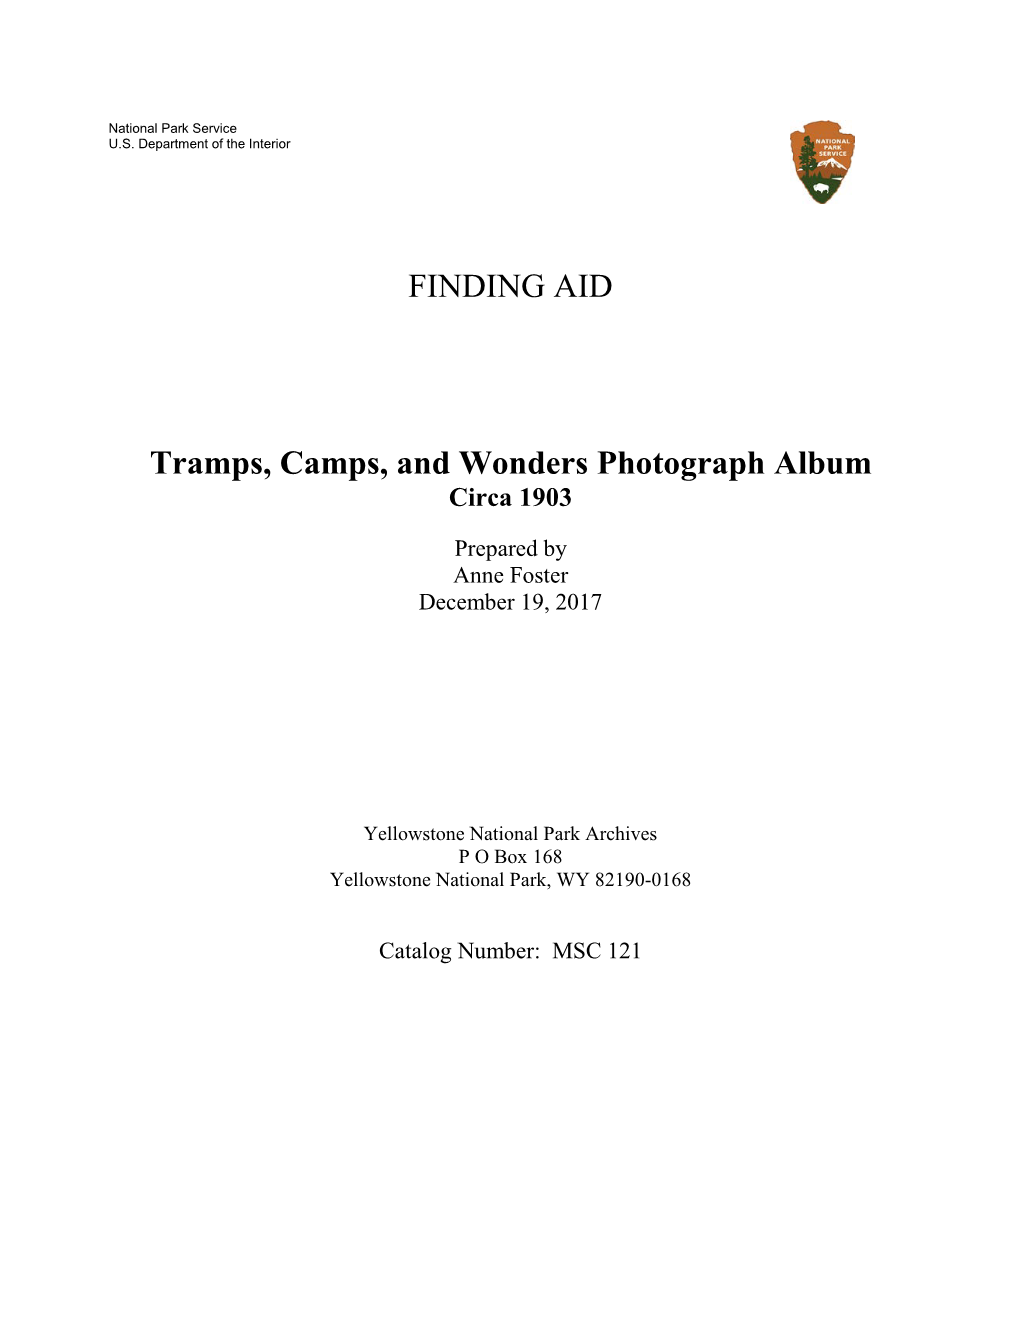 FINDING AID Tramps, Camps, and Wonders Photograph Album